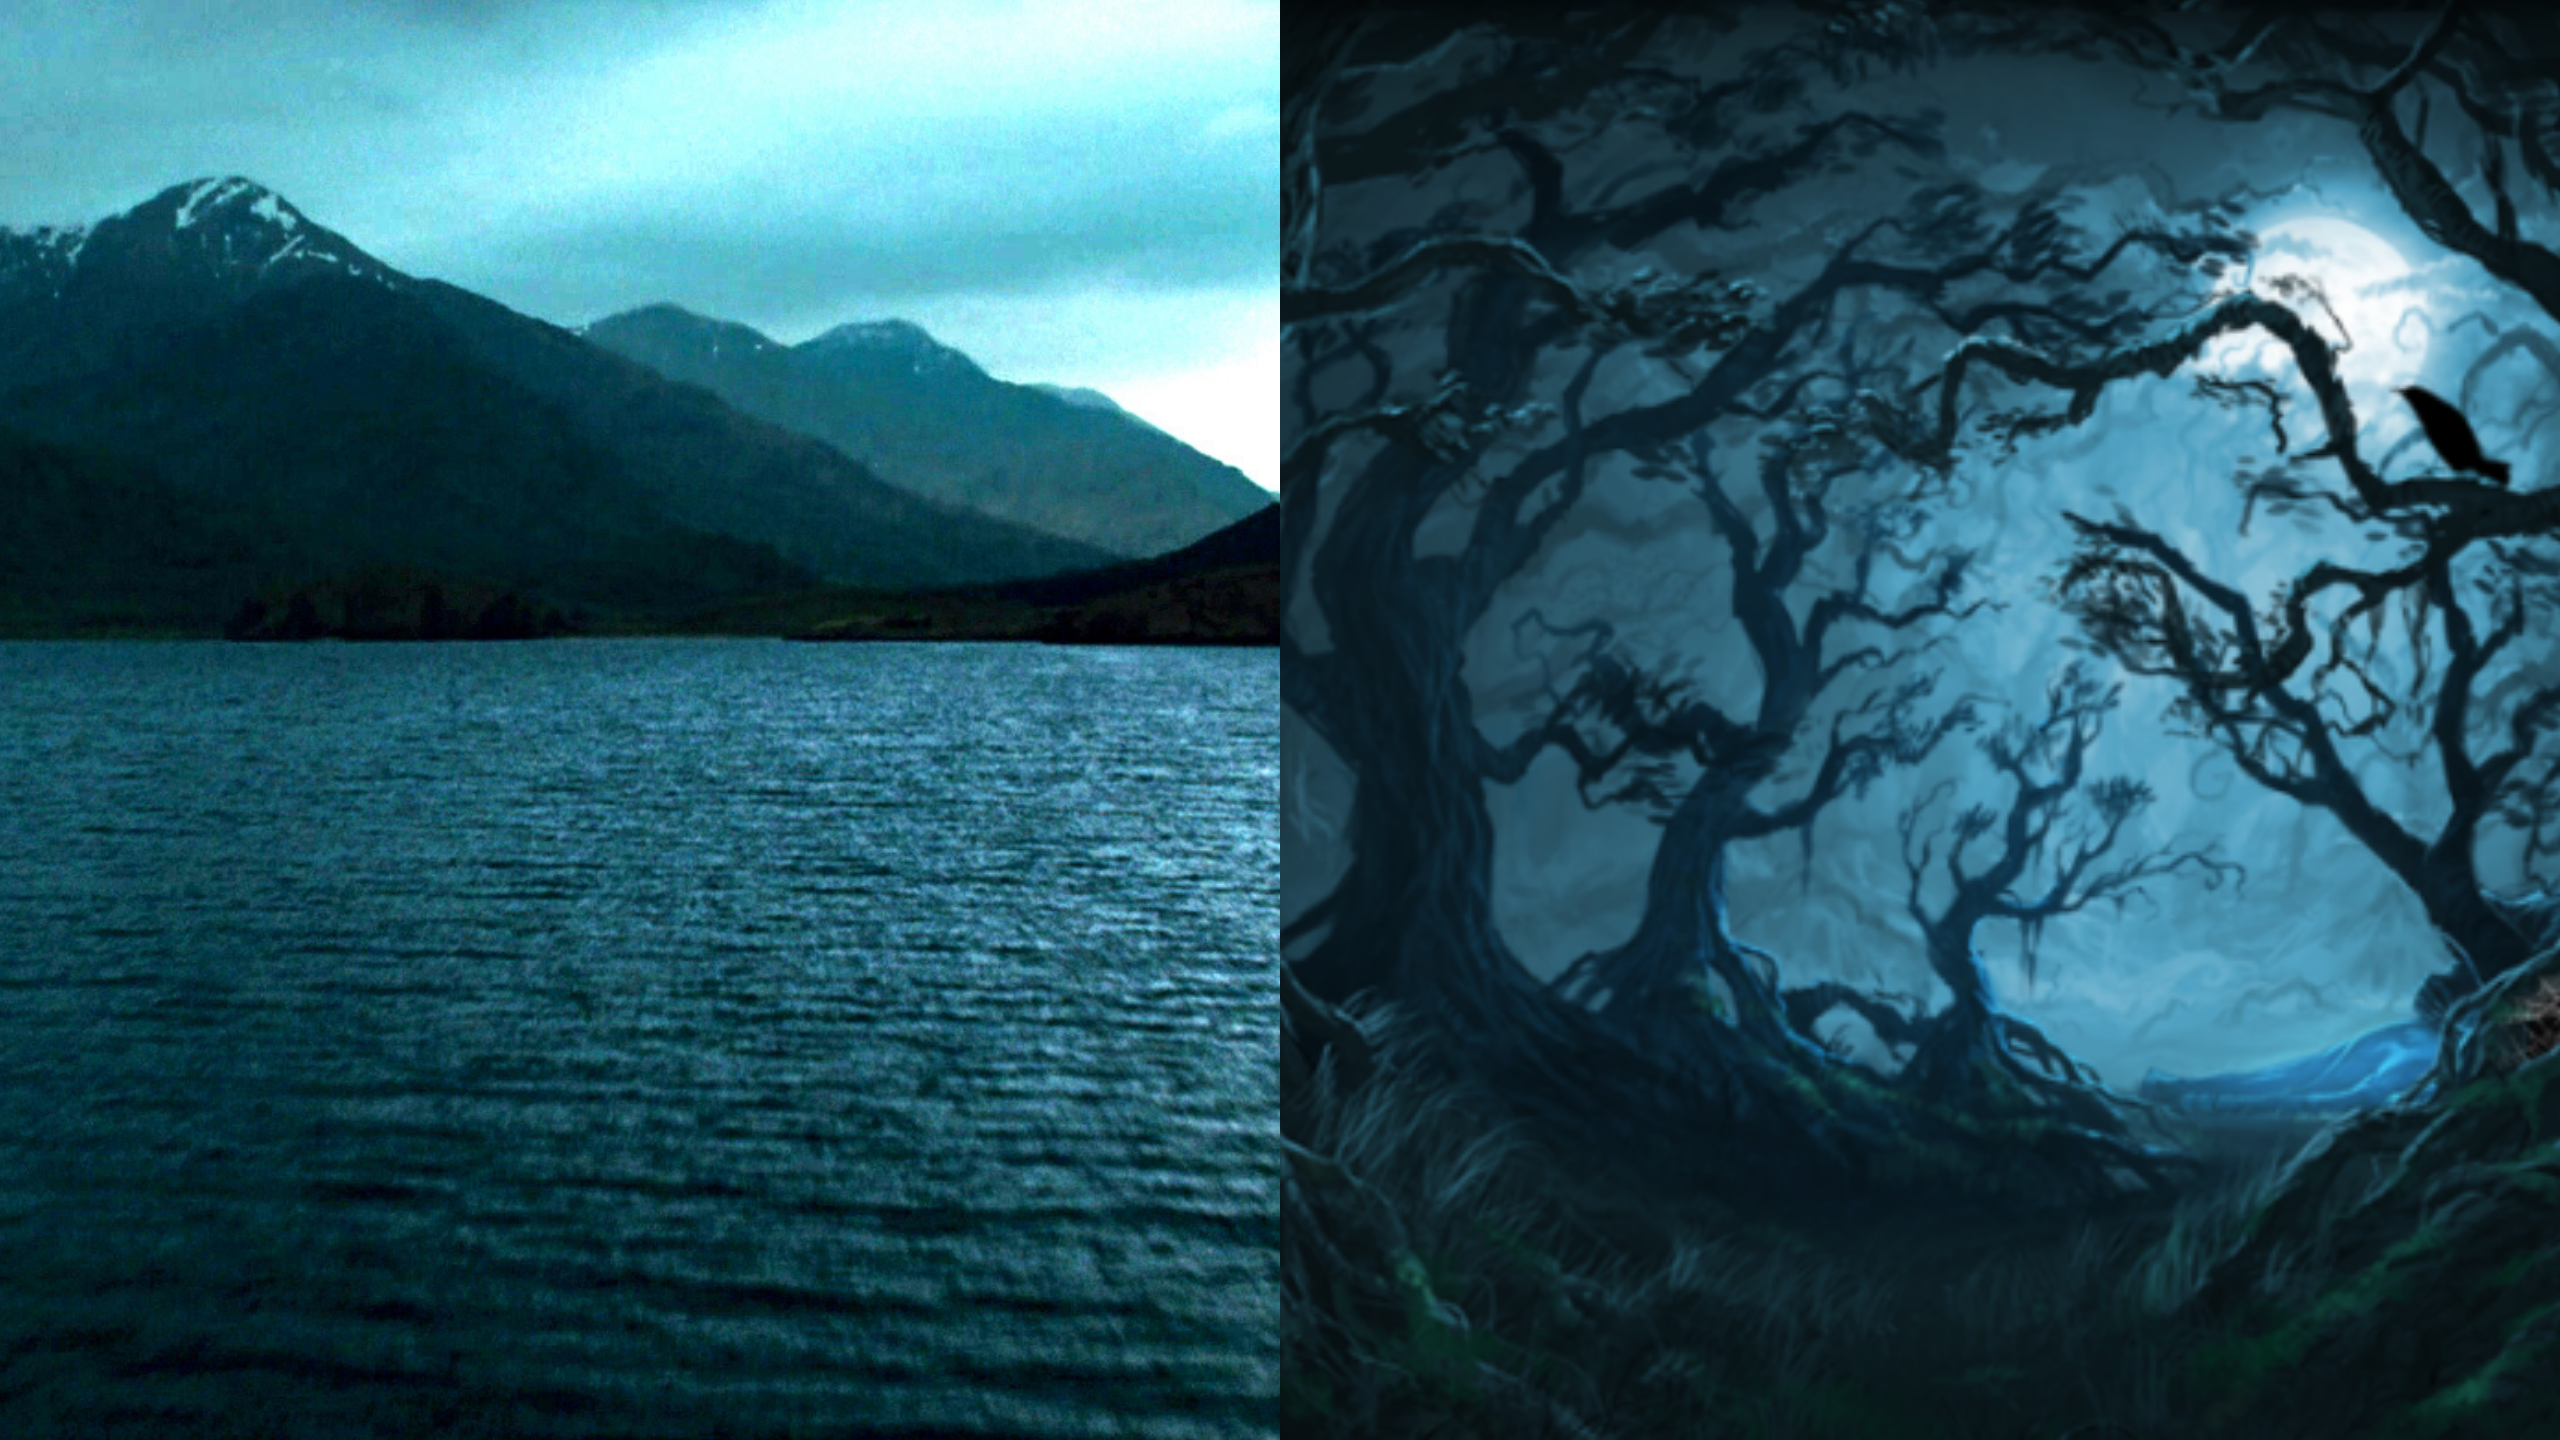 Would you rather go into the Forbidden Forest or swim in The Great Lake?